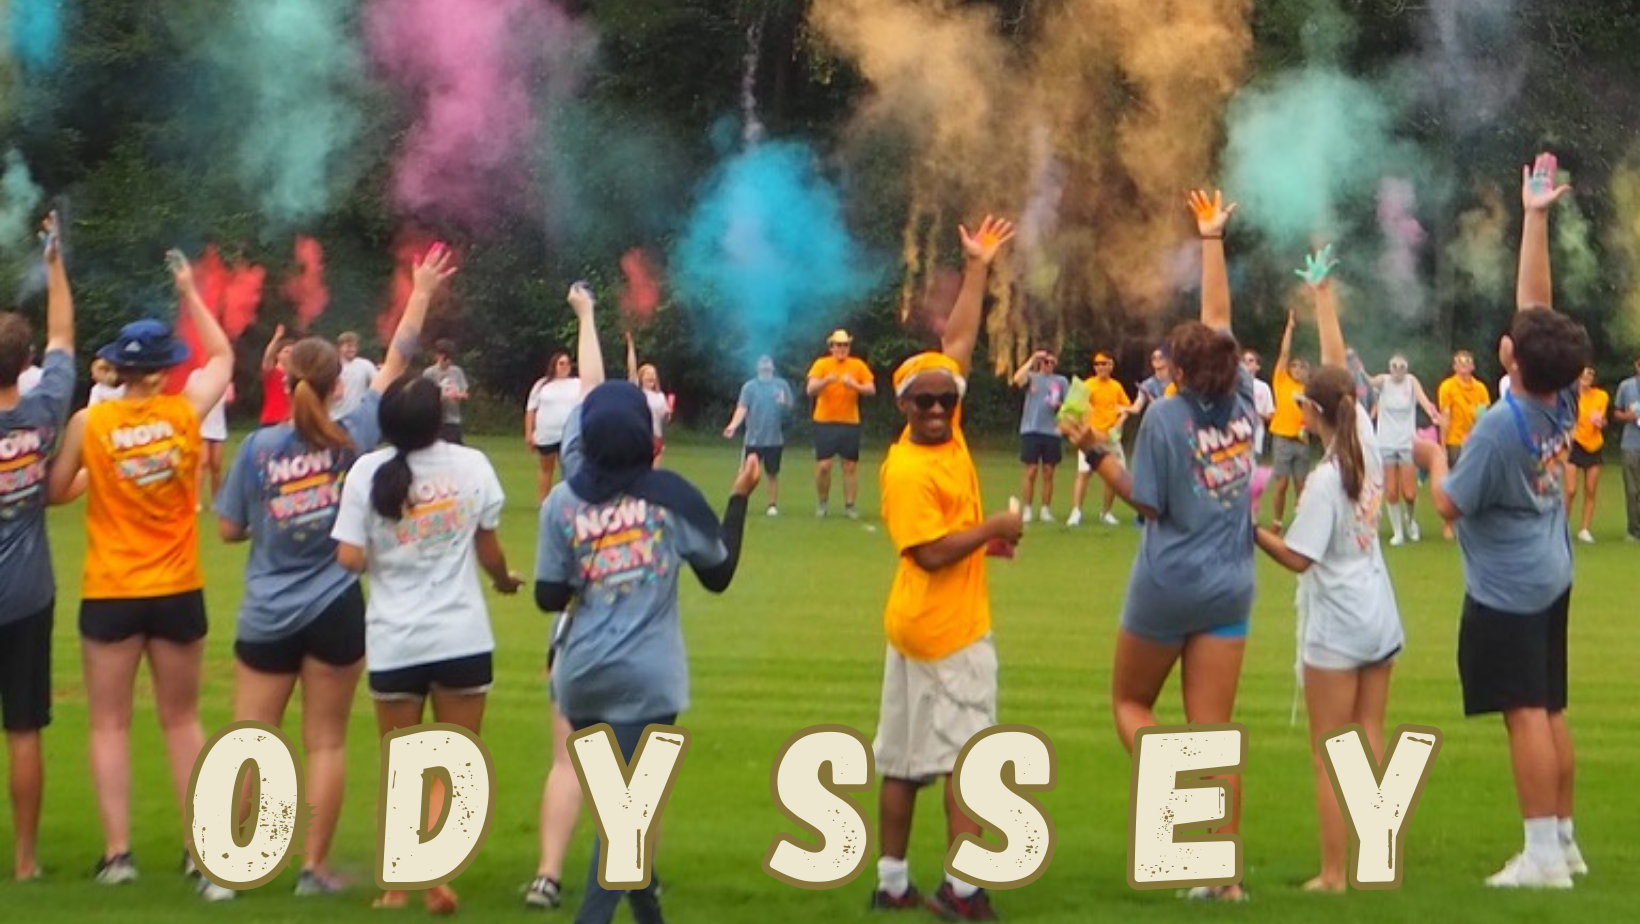 A group of student throwing color powder in the air at wreck camp odyssey